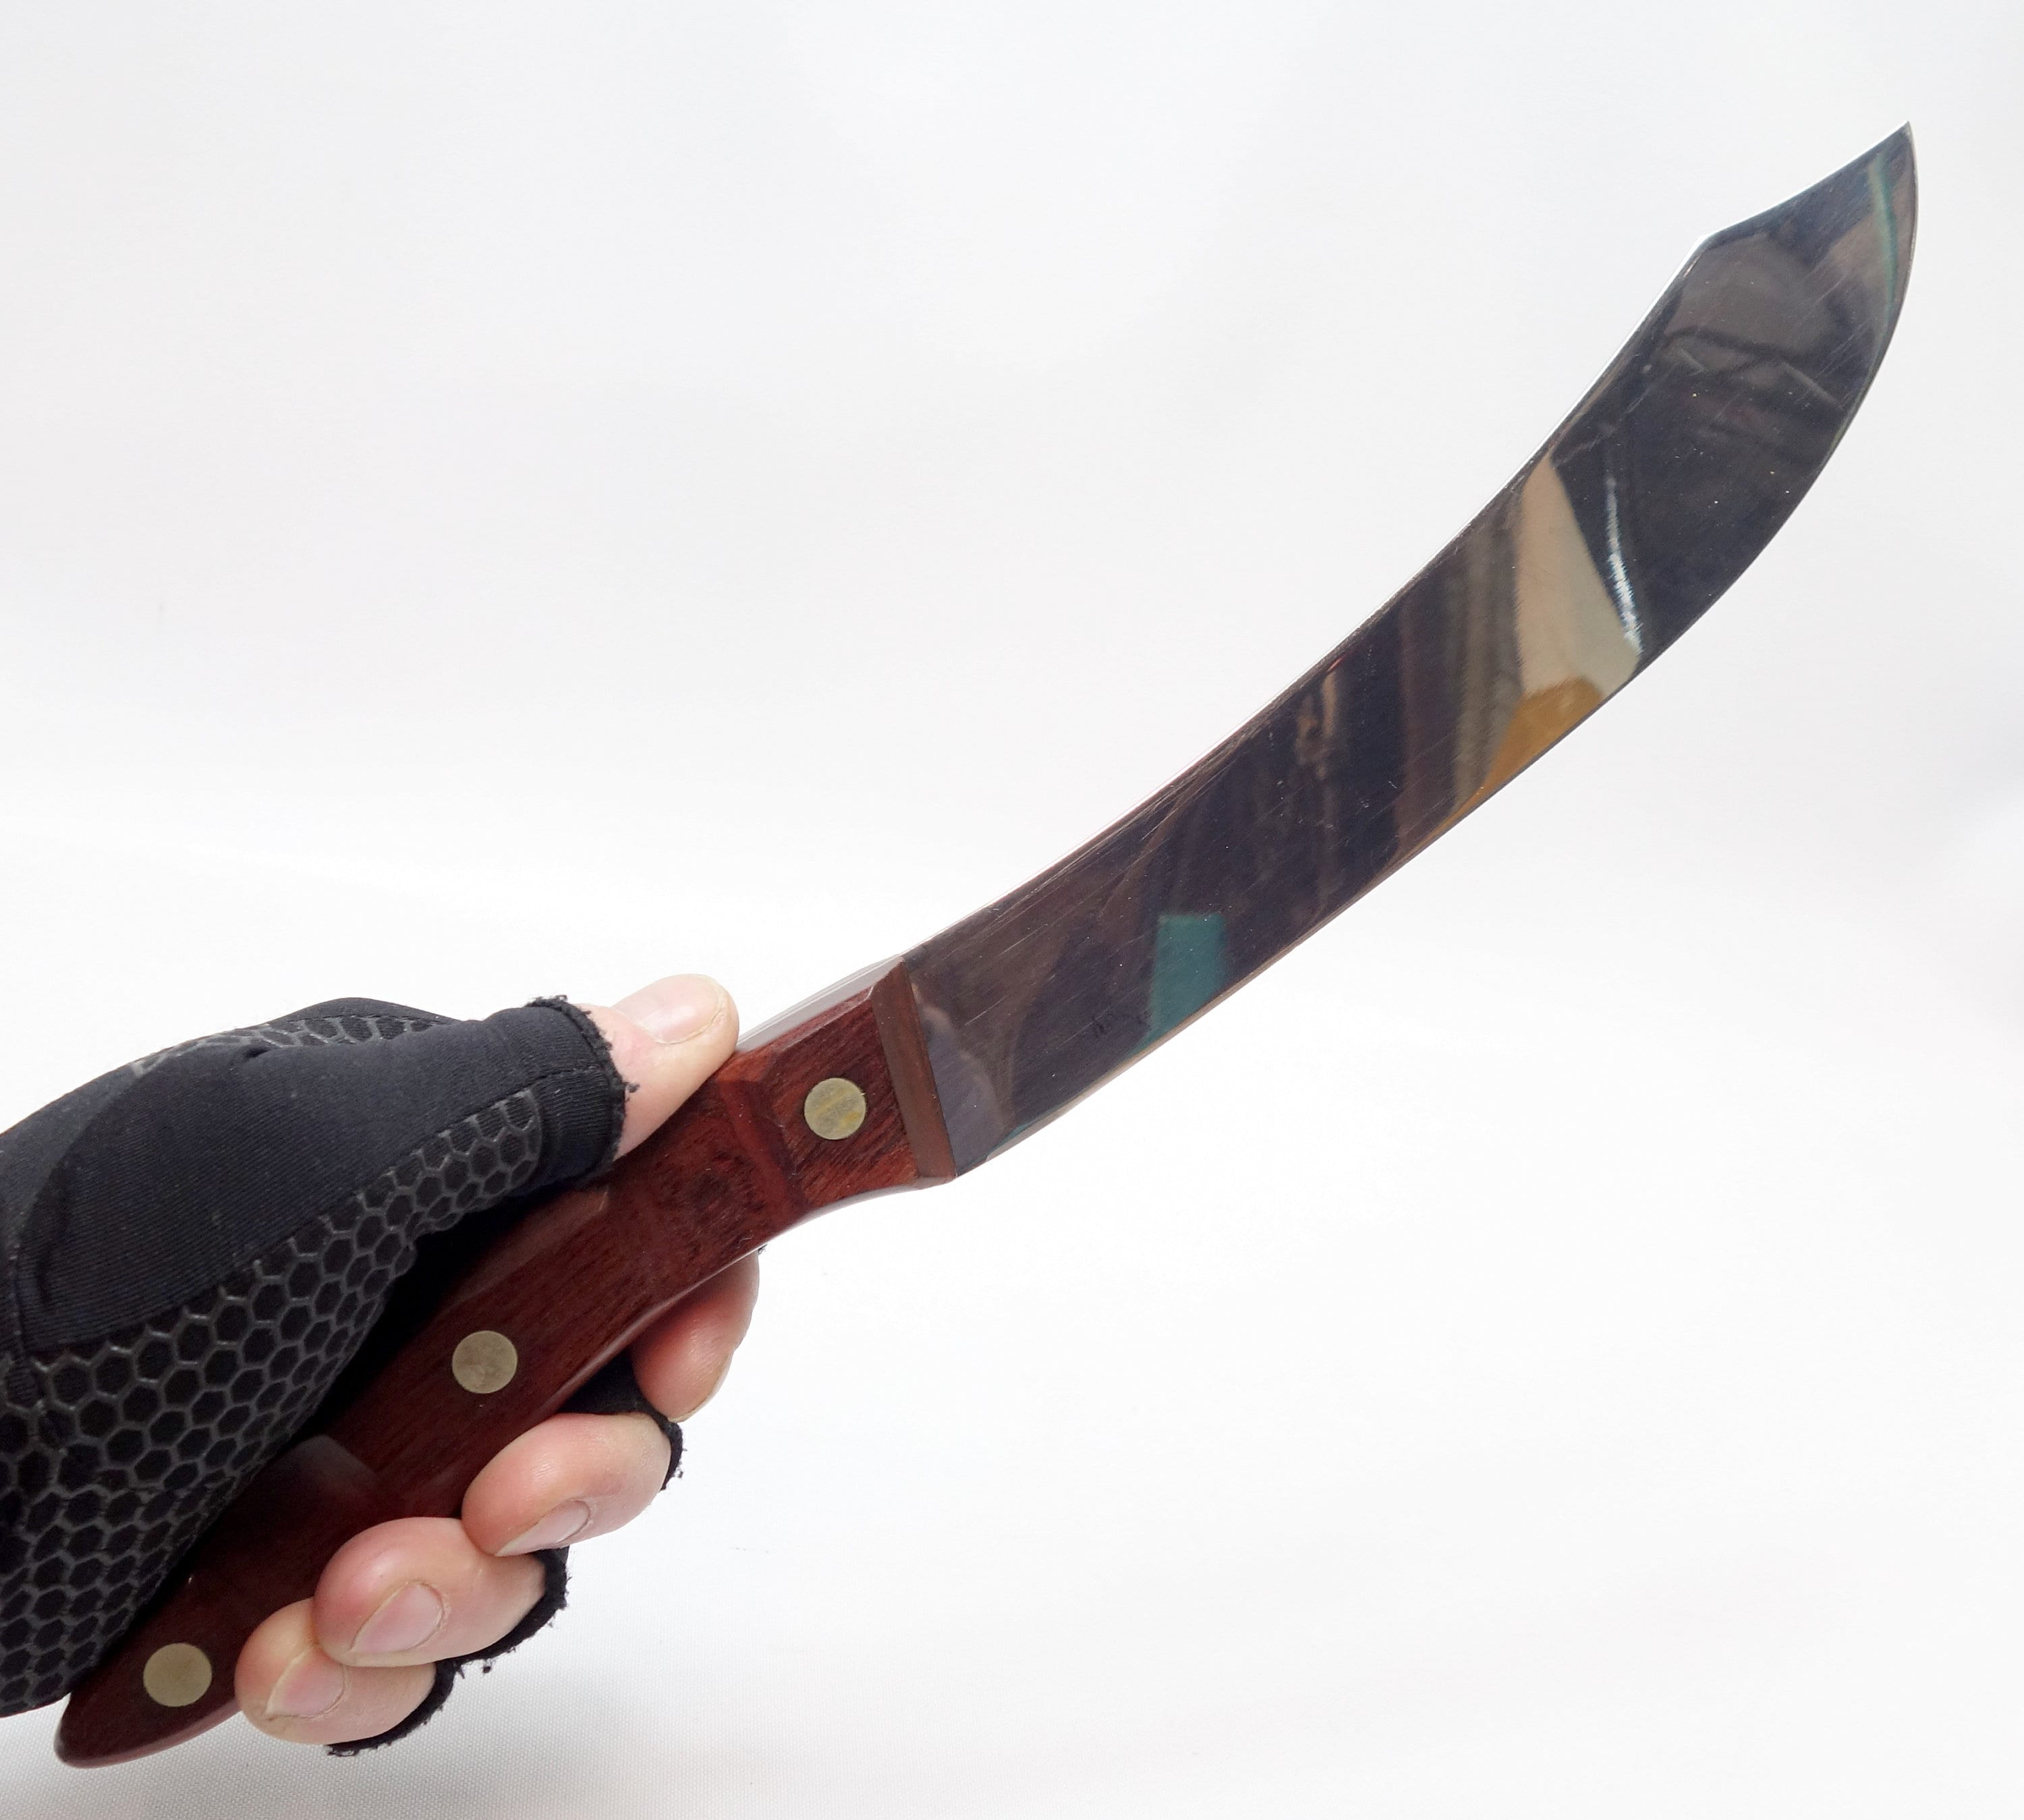 1084 Custom Crafted Damascus Steel 10 Inch Bowie Style Knife With Bone and  Rosewood Handle and Comes With Custom Leather Sheath. 